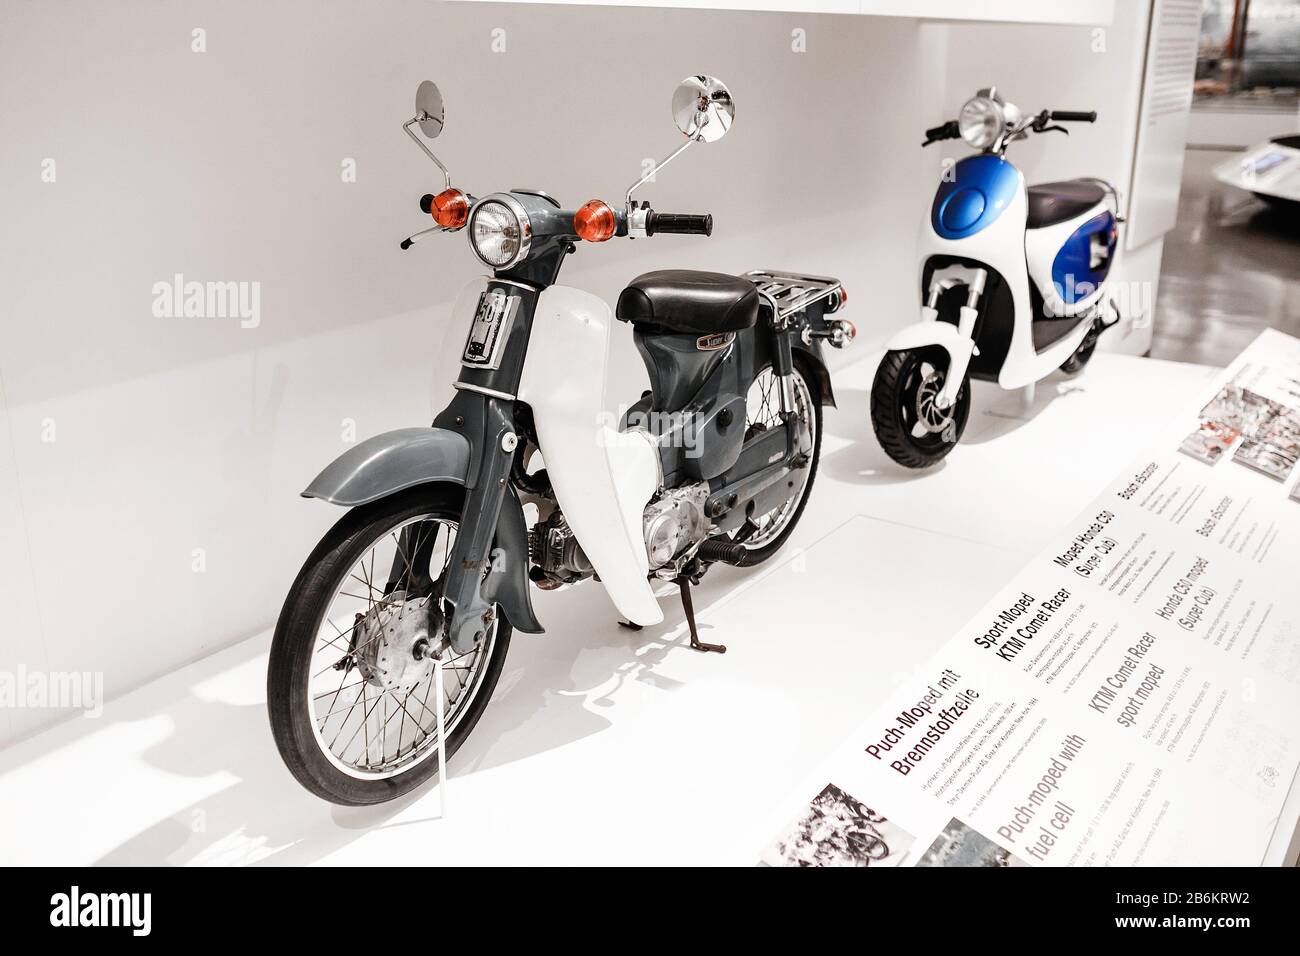 23 MARCH 2017, VIENNA, AUSTRIA: Vintage retro motorcycle in technical museum of Vienna Stock Photo